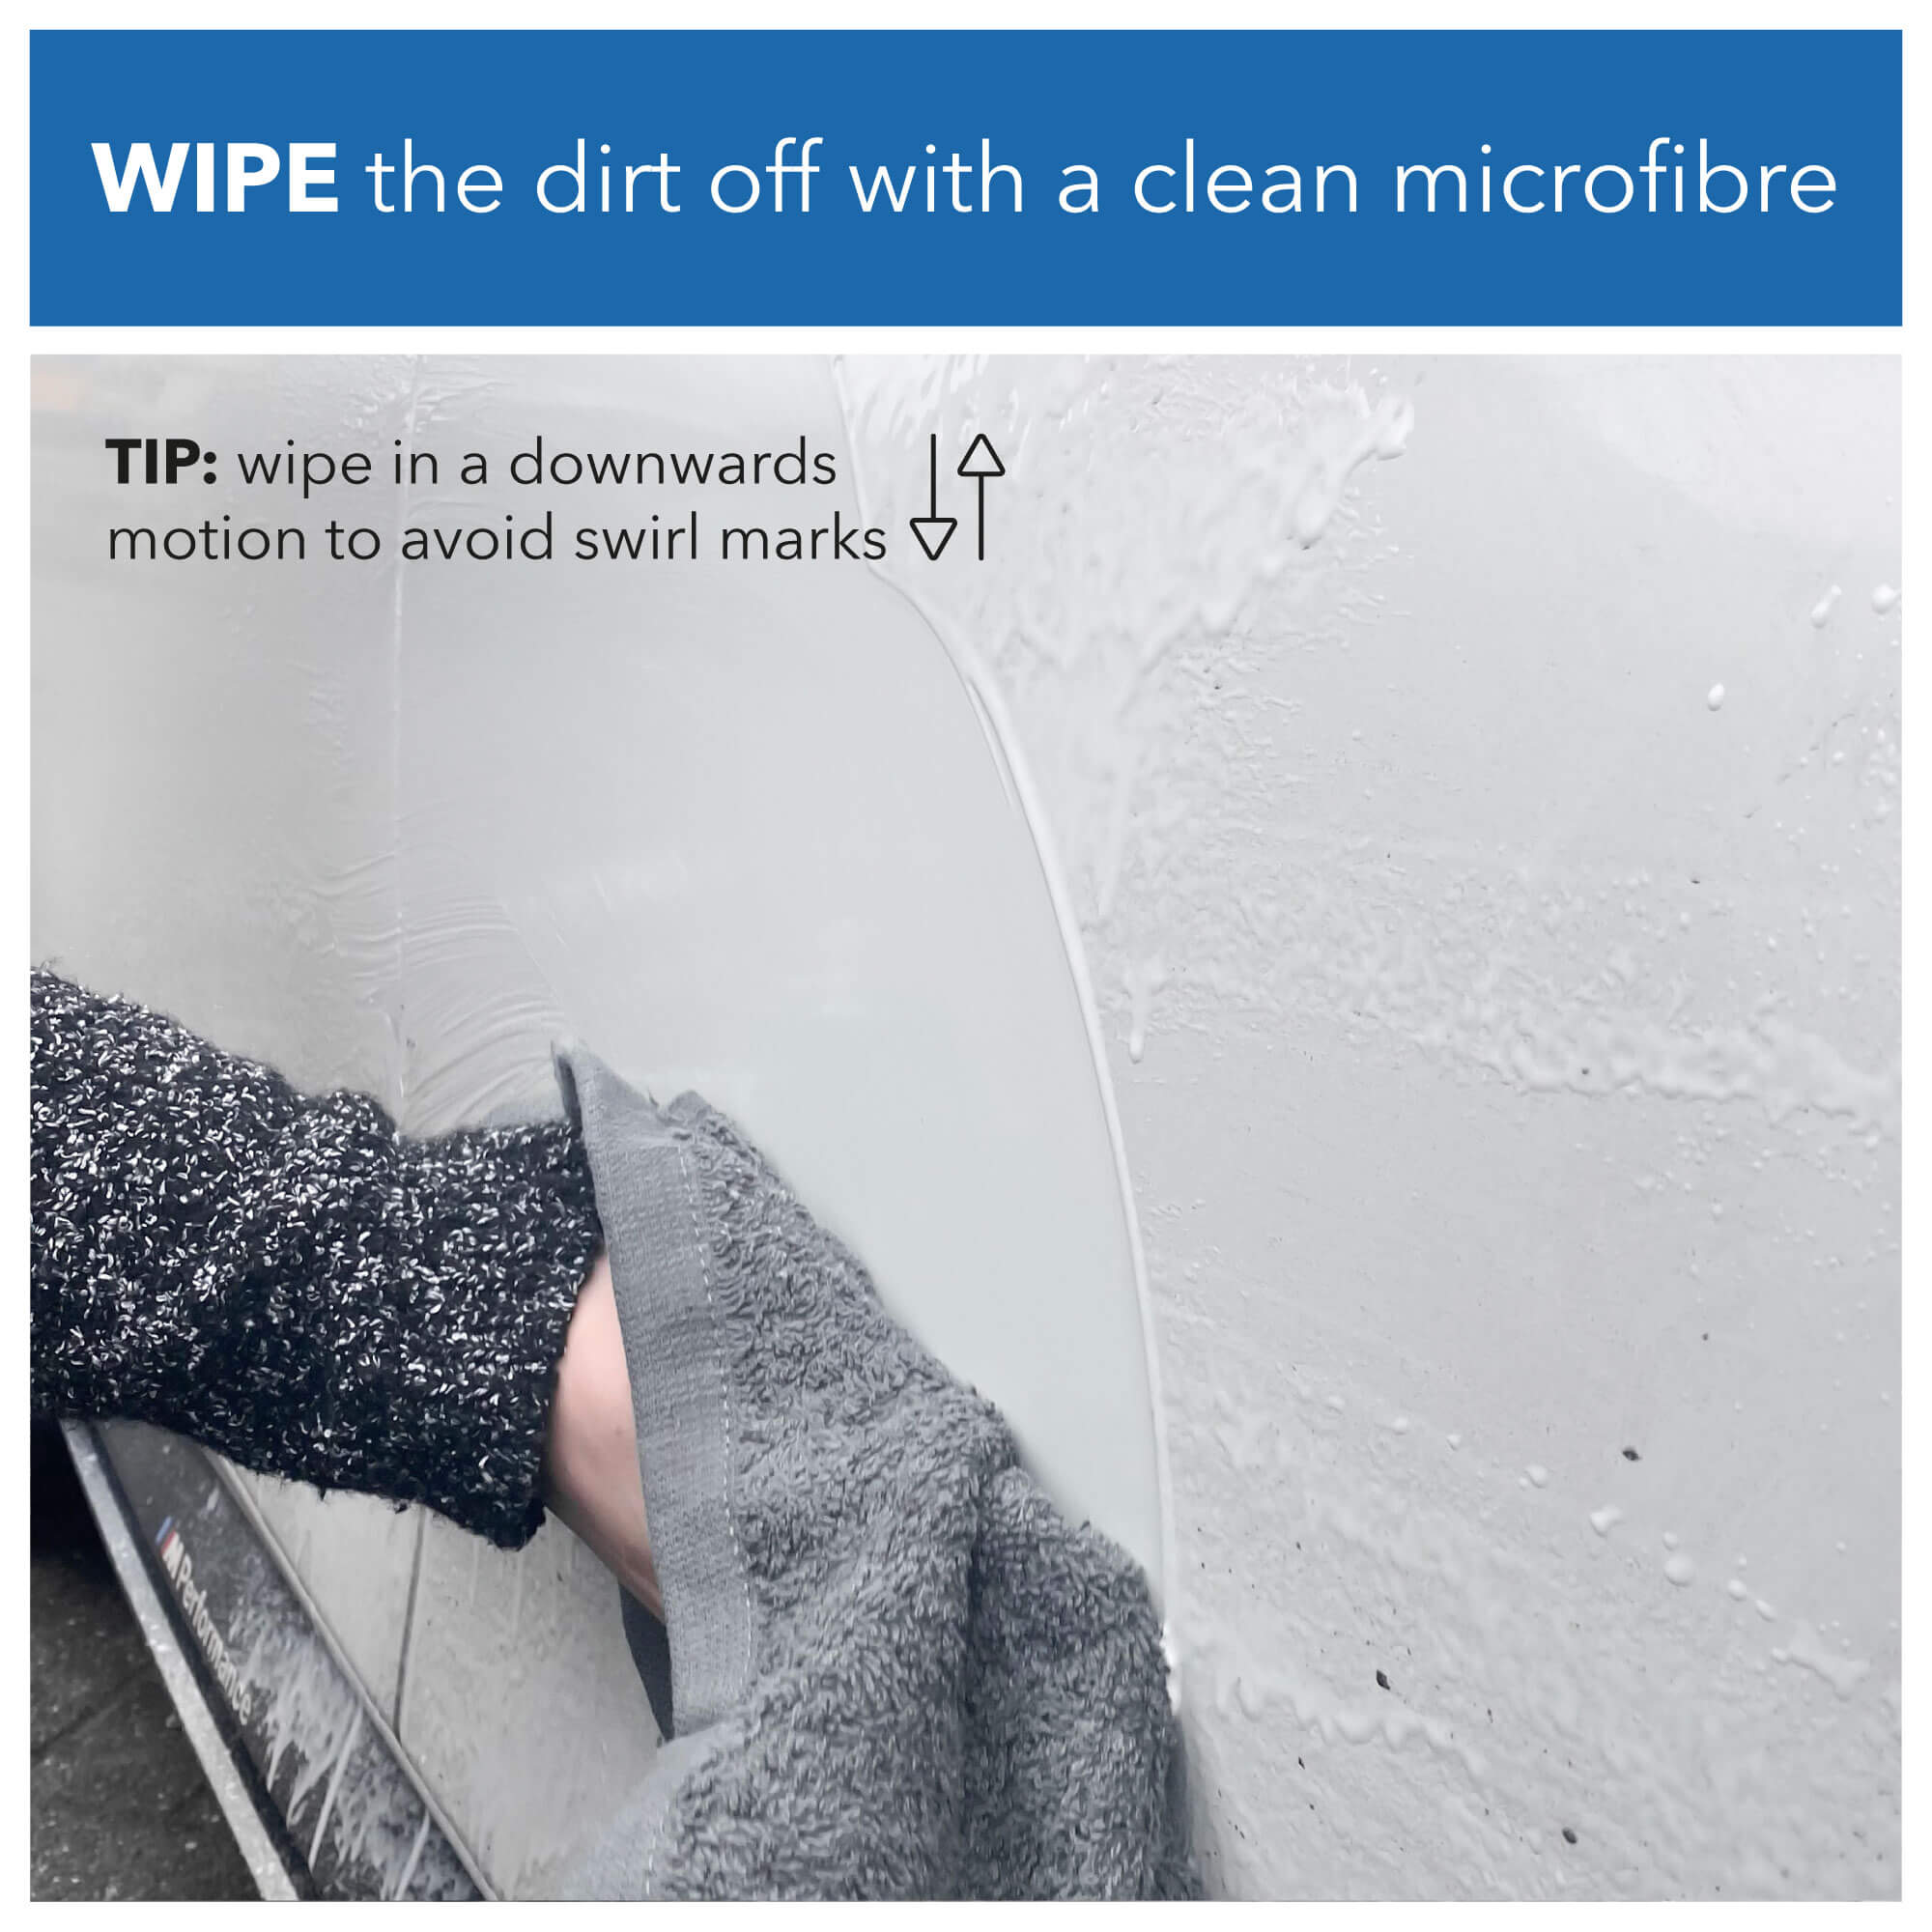 Wipe the dirt off with a clean microfibre cloth